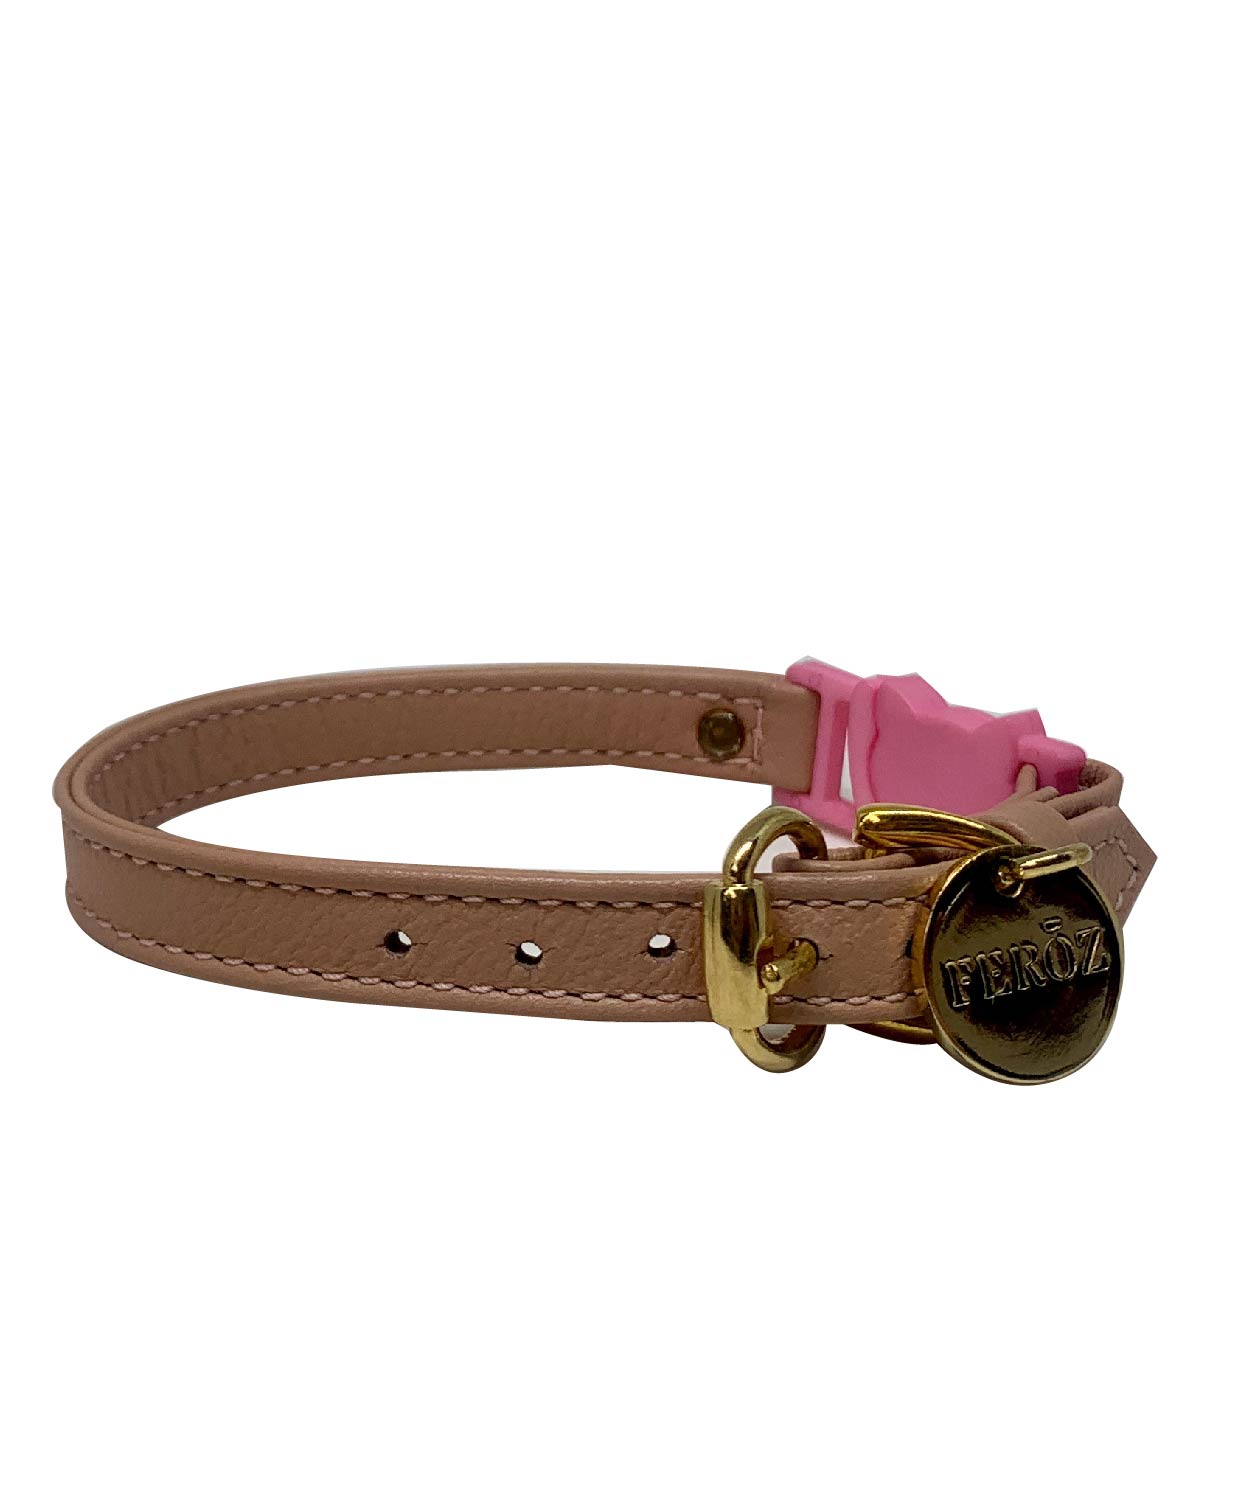 Dusty rose leather cat collar